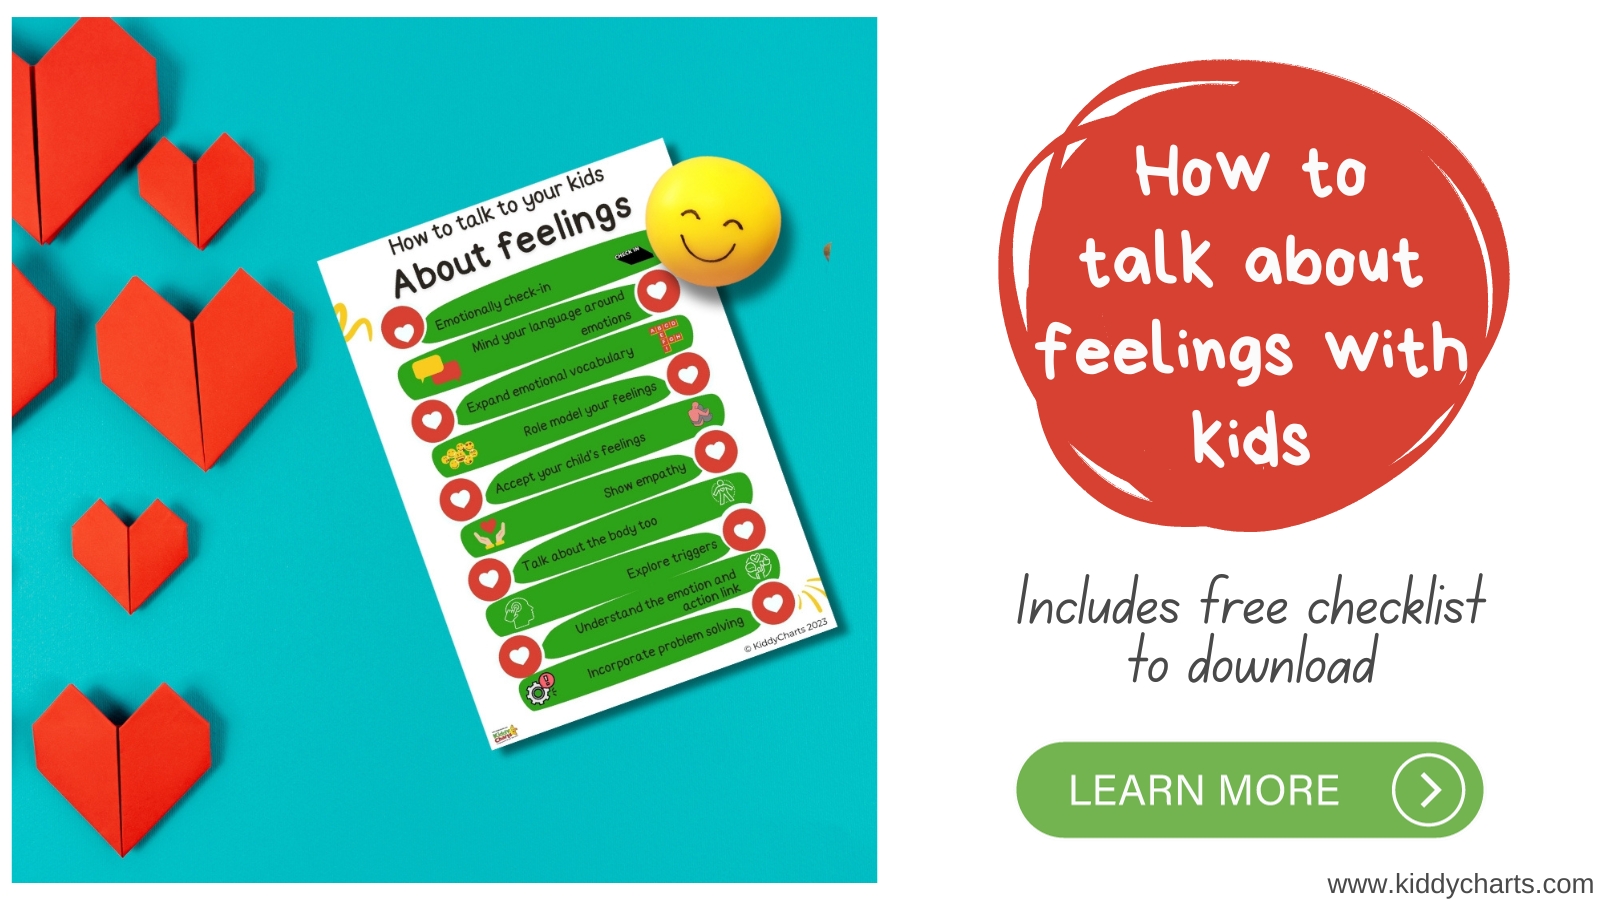 Emotional intelligence: How to talk to kids about feelings